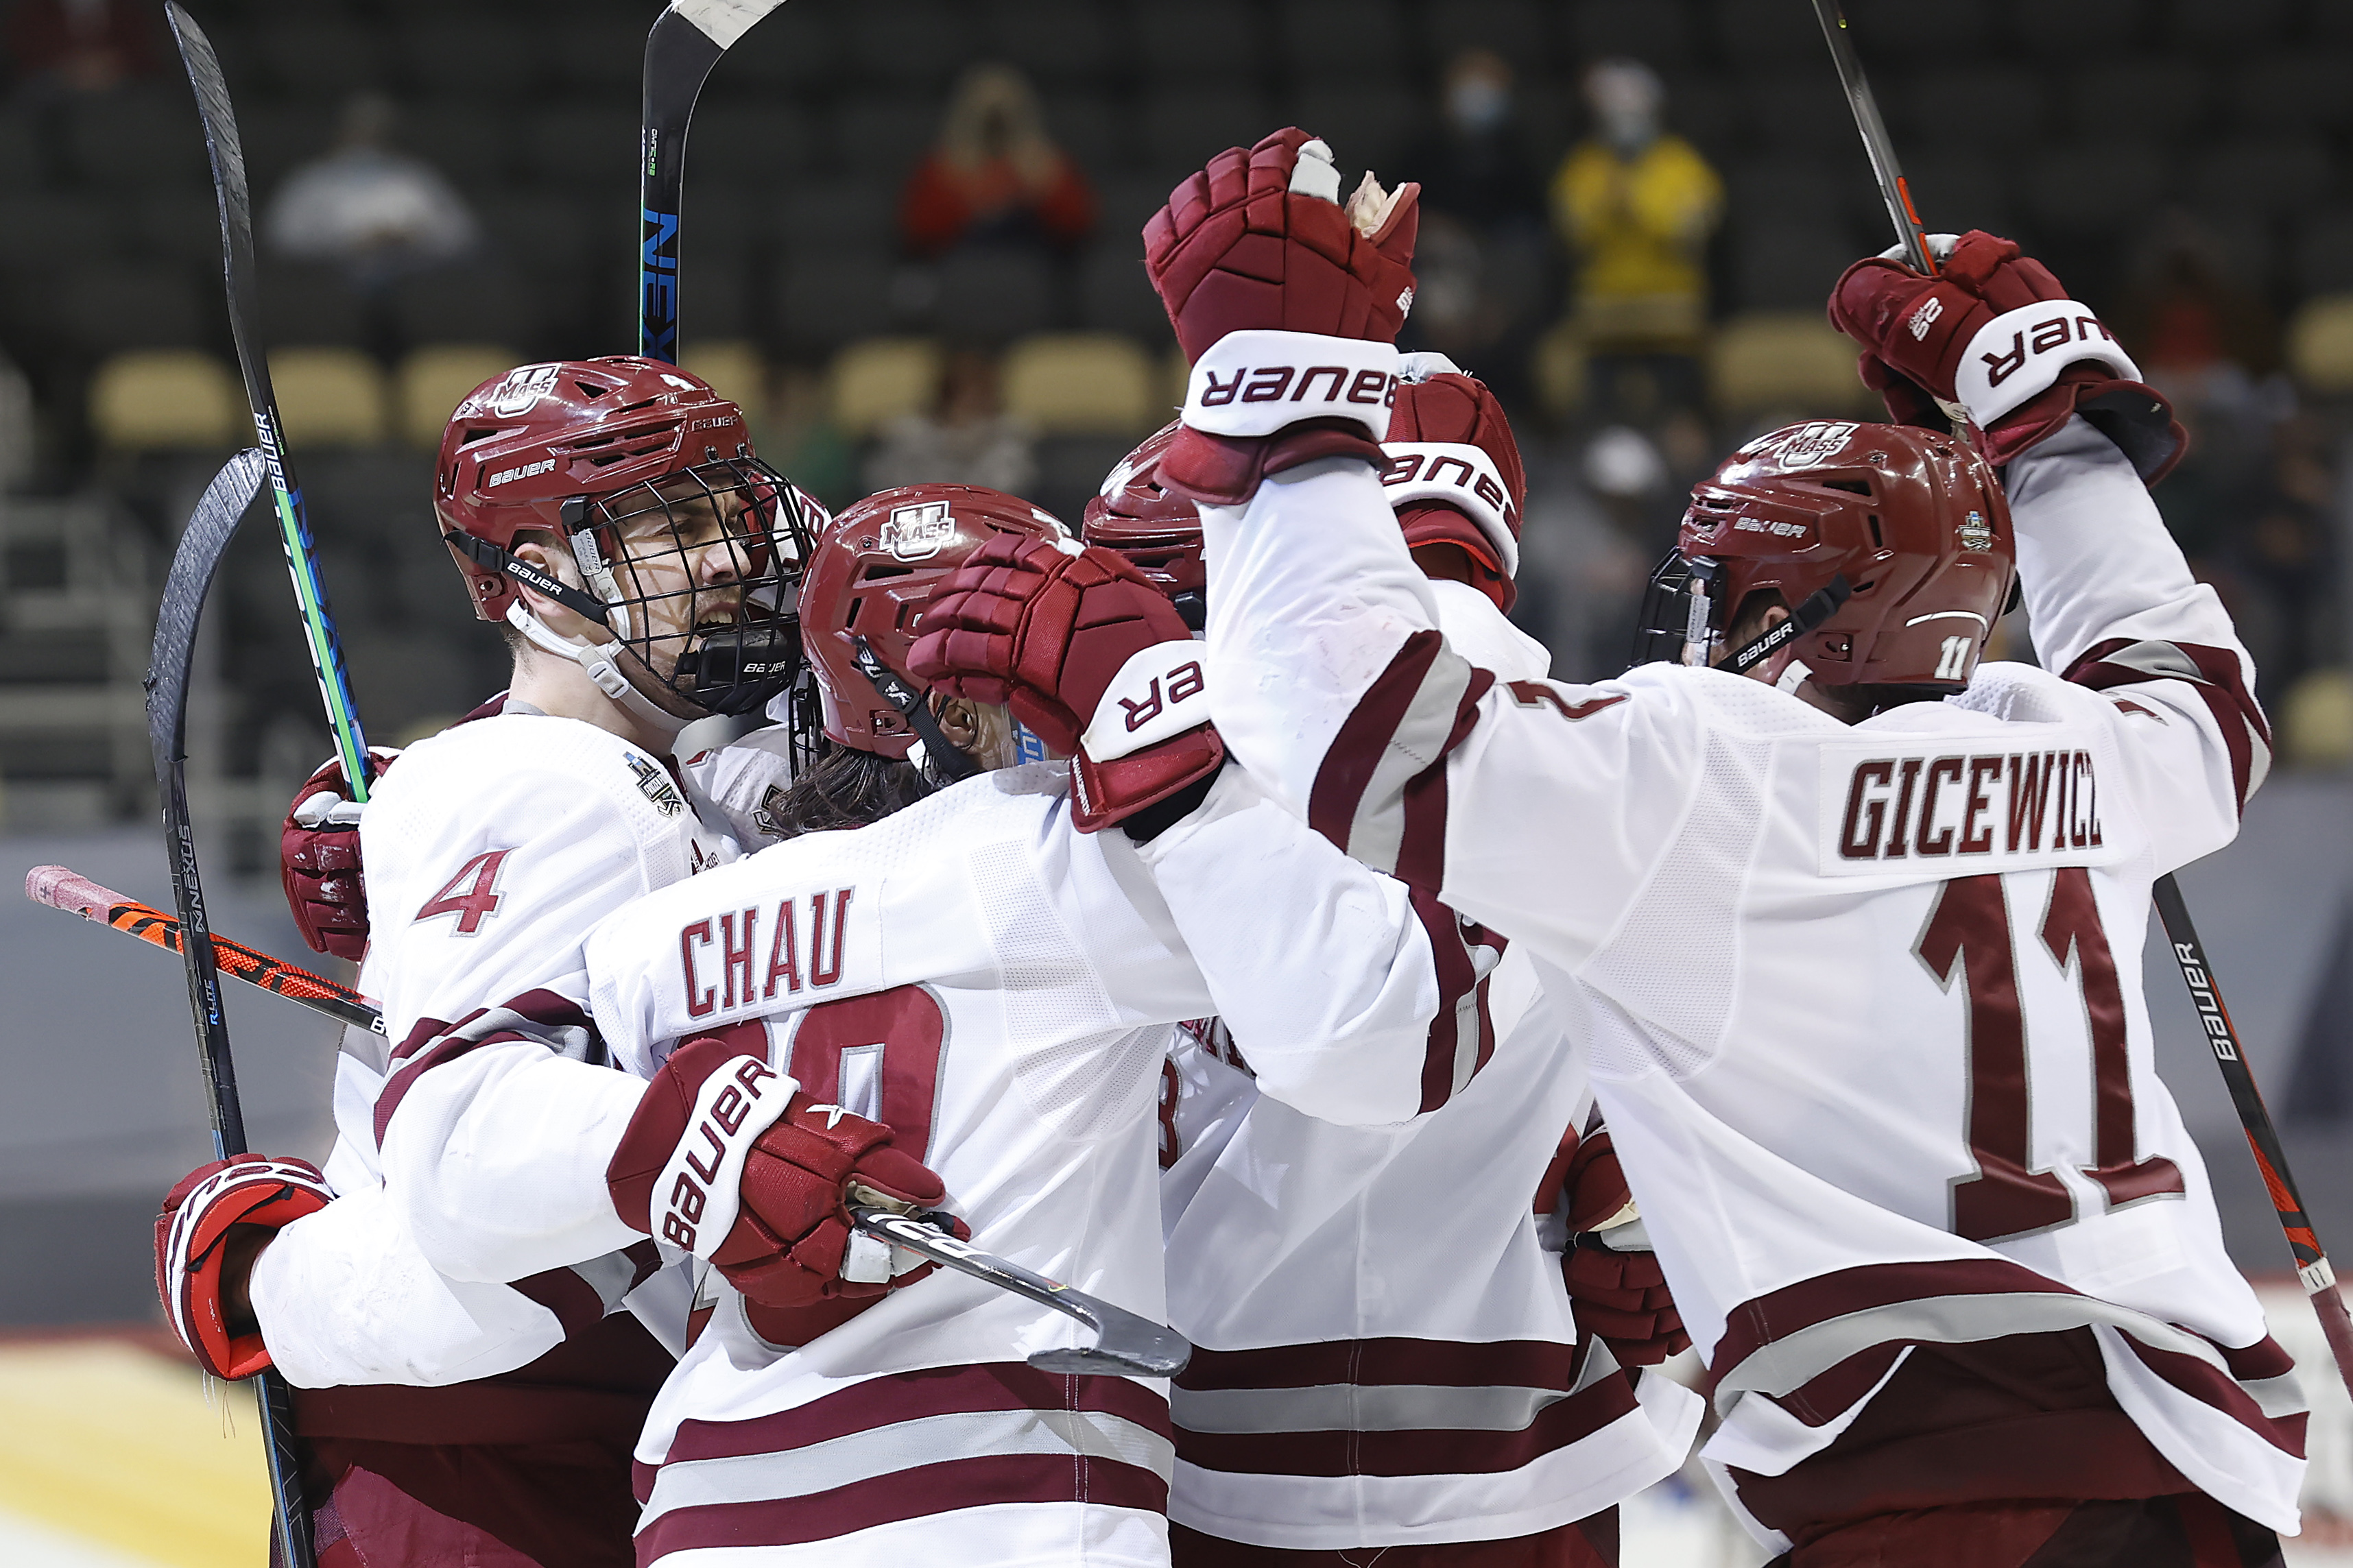 UMass Hockey on X: Who's joining us in Buffalo??? We will have